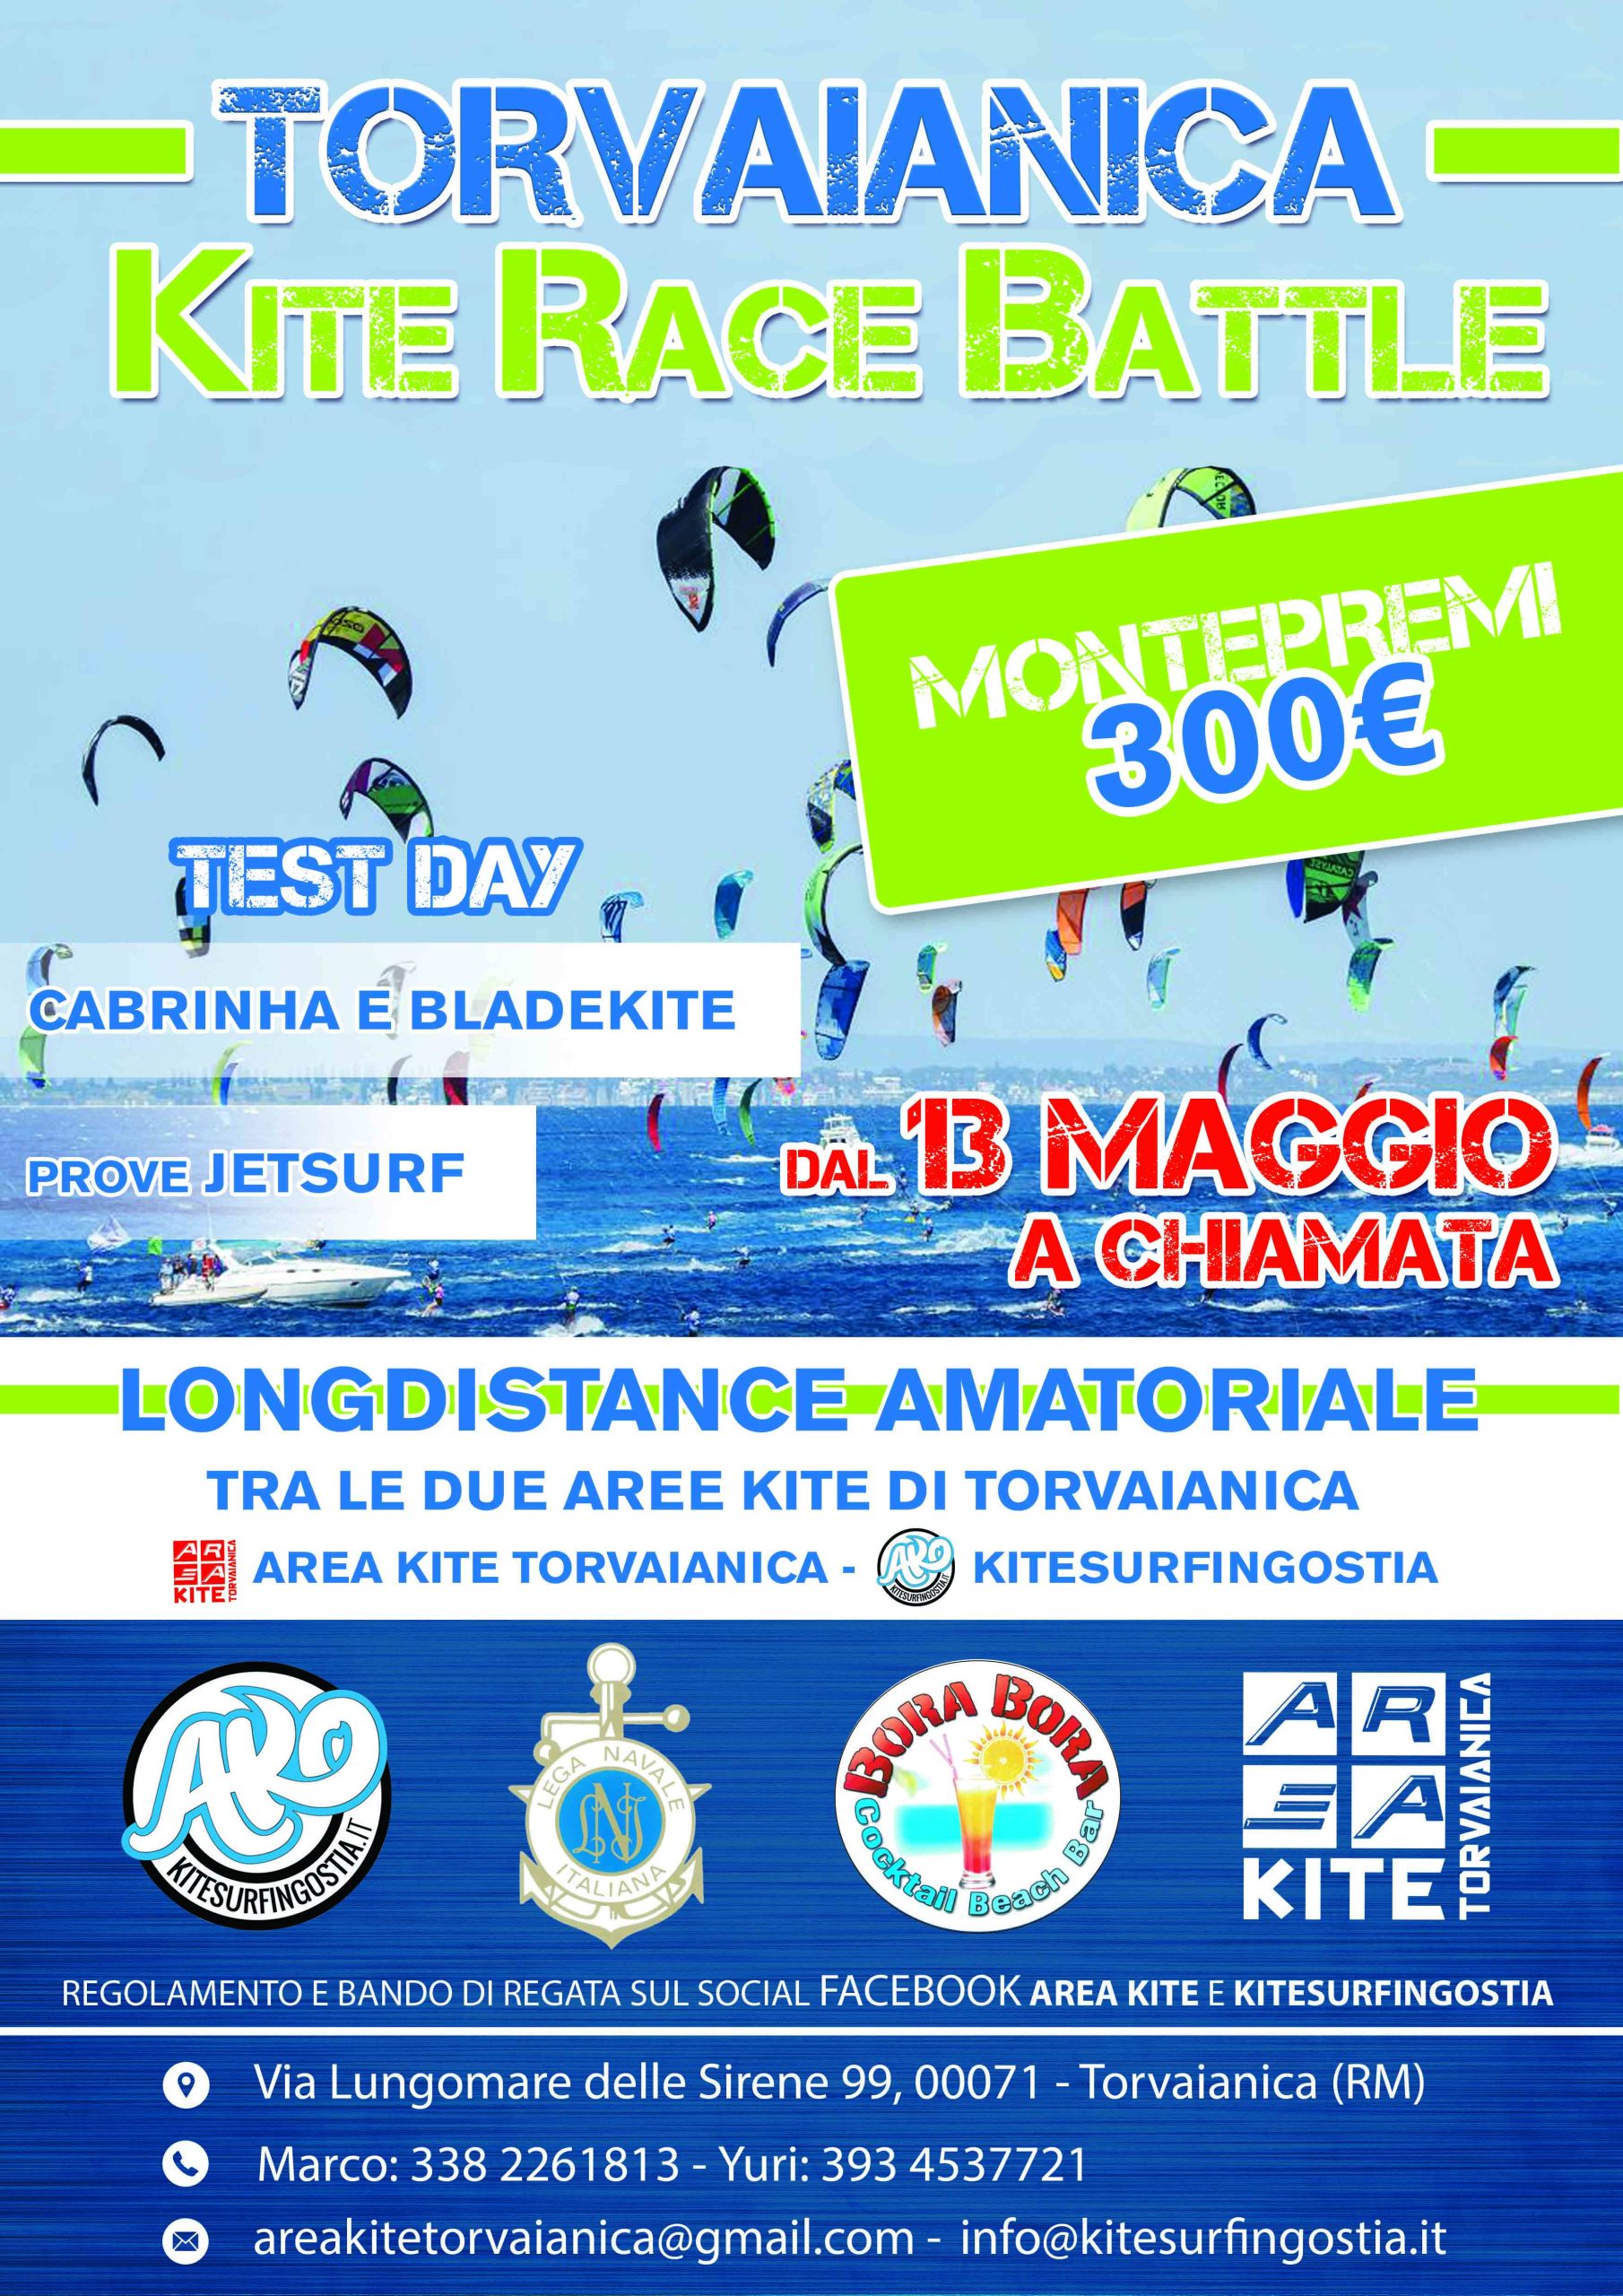 Torvaianica Kite Race Battle